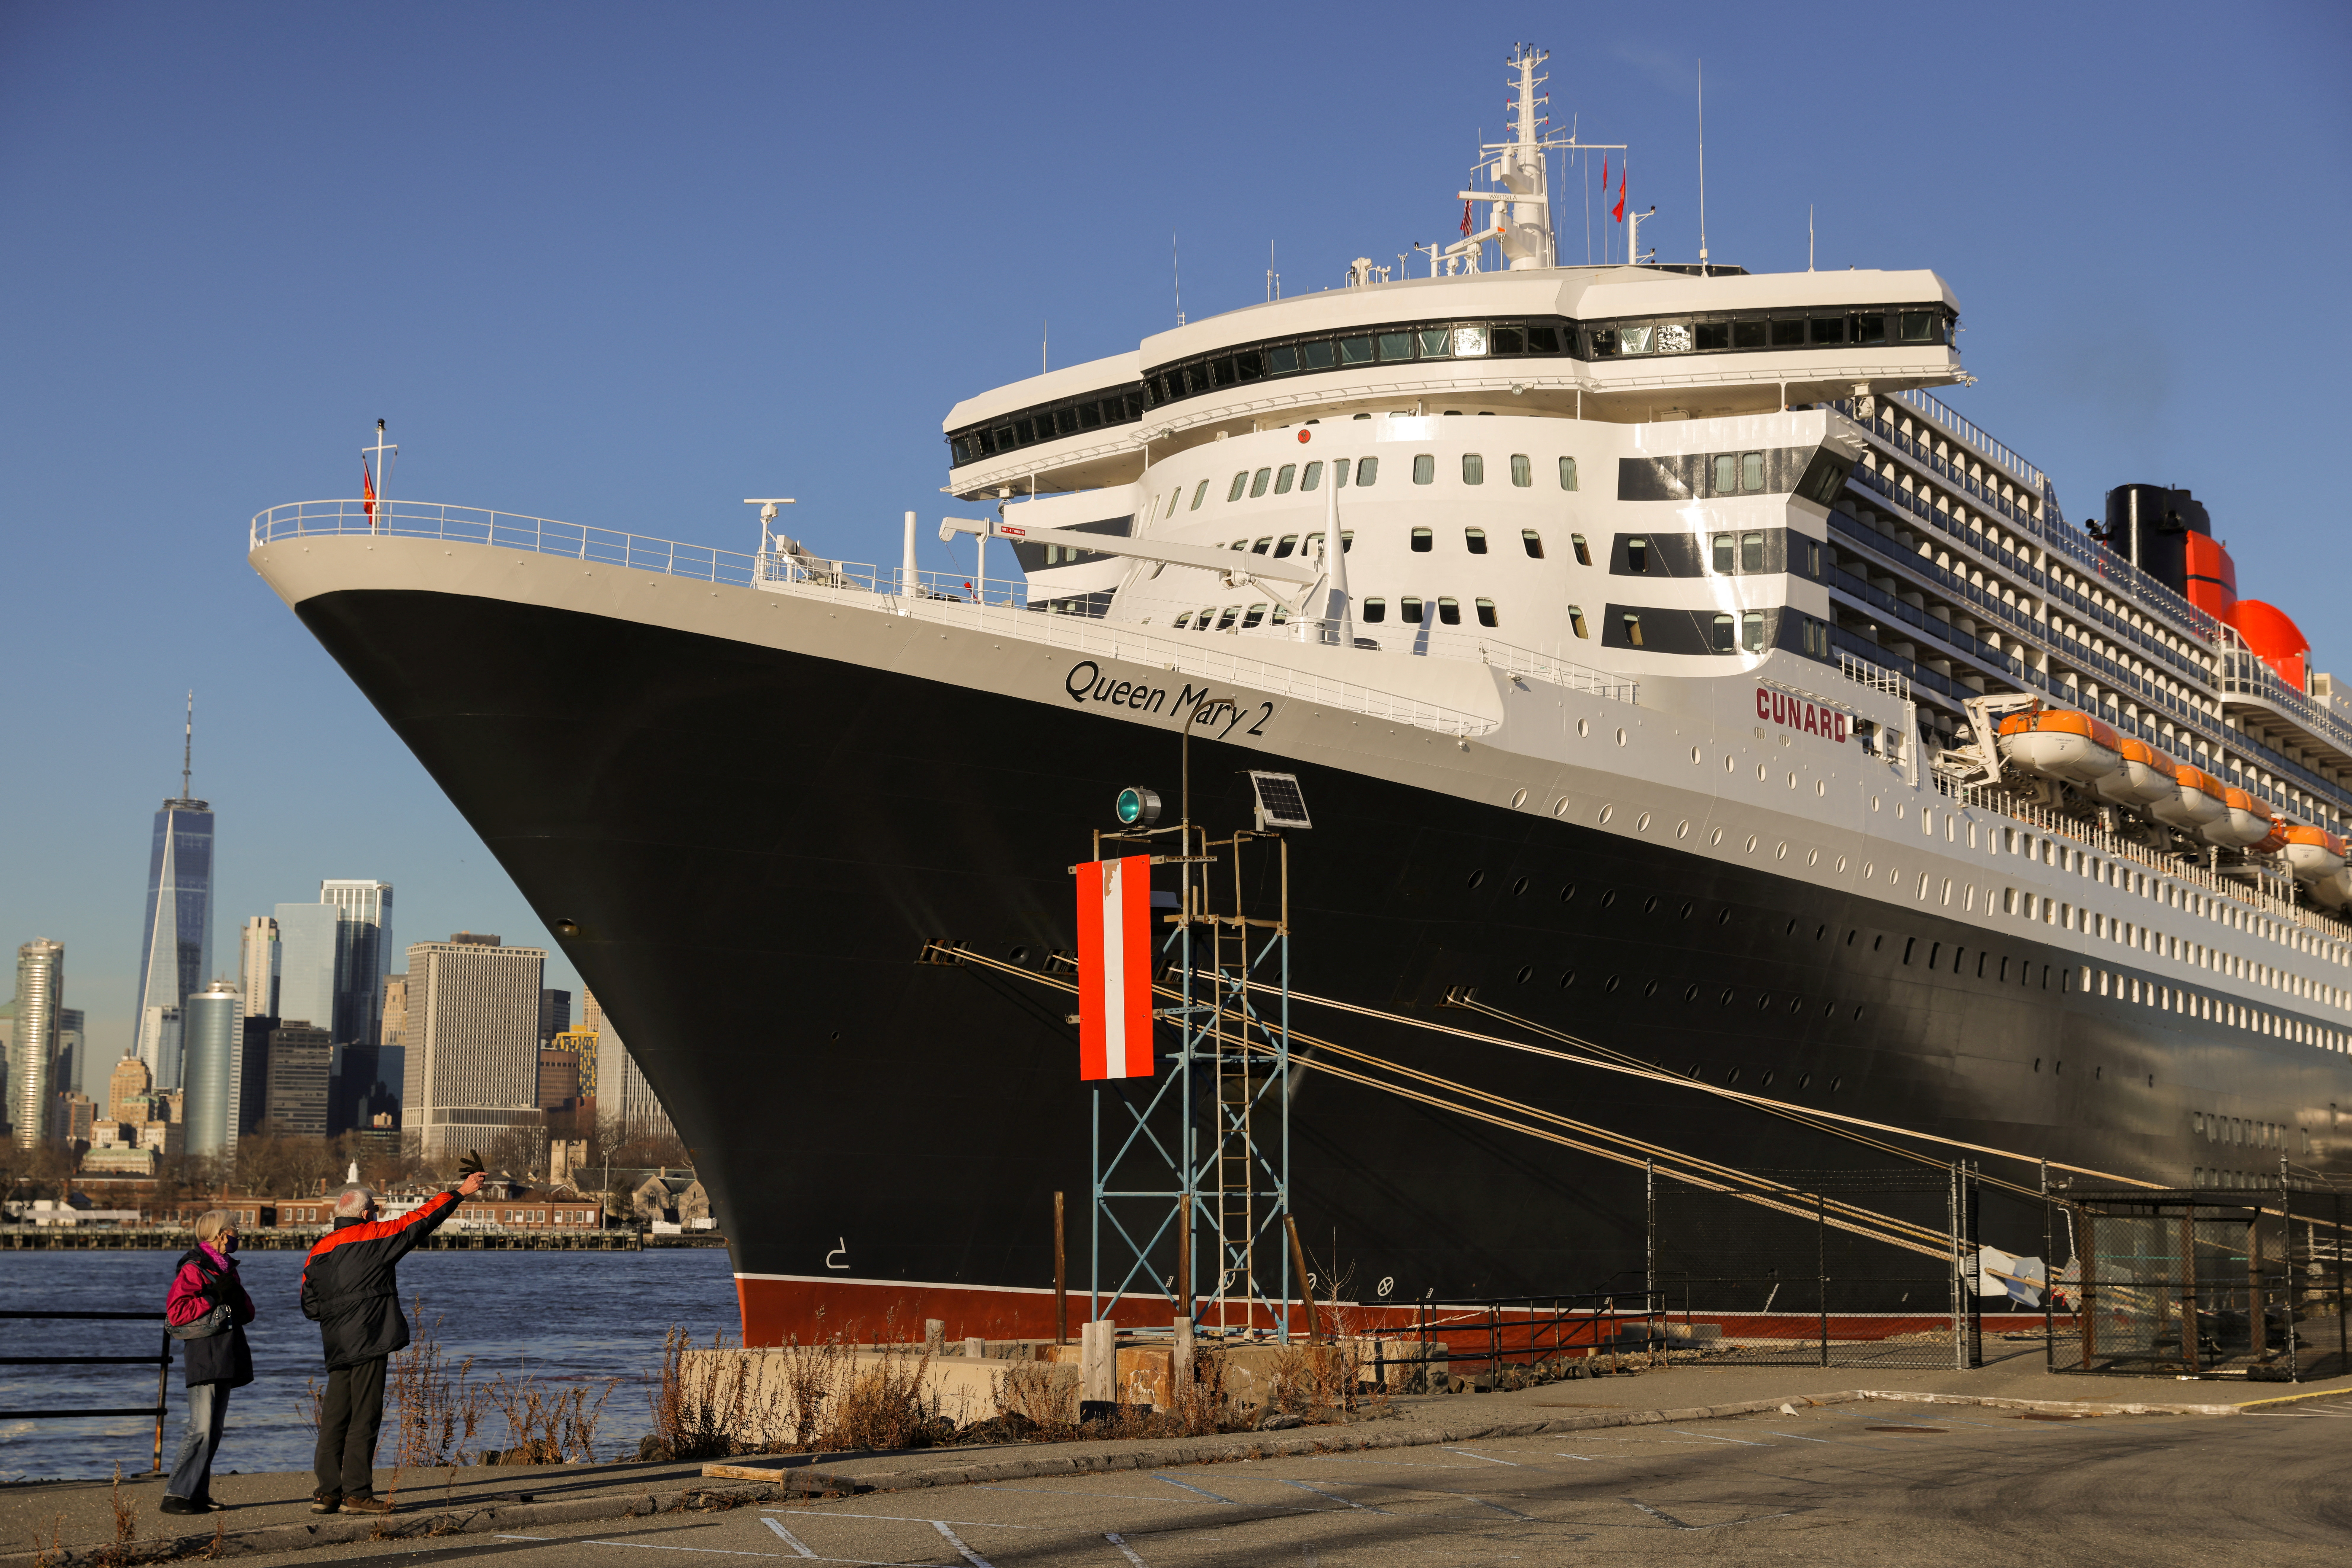 People look toward the Queen Mary 2 cruise ship by Cunard Line, owned by Carnival Corporation & plc. as it sits docked at Brooklyn Cruise Terminal in Brooklyn, New York City